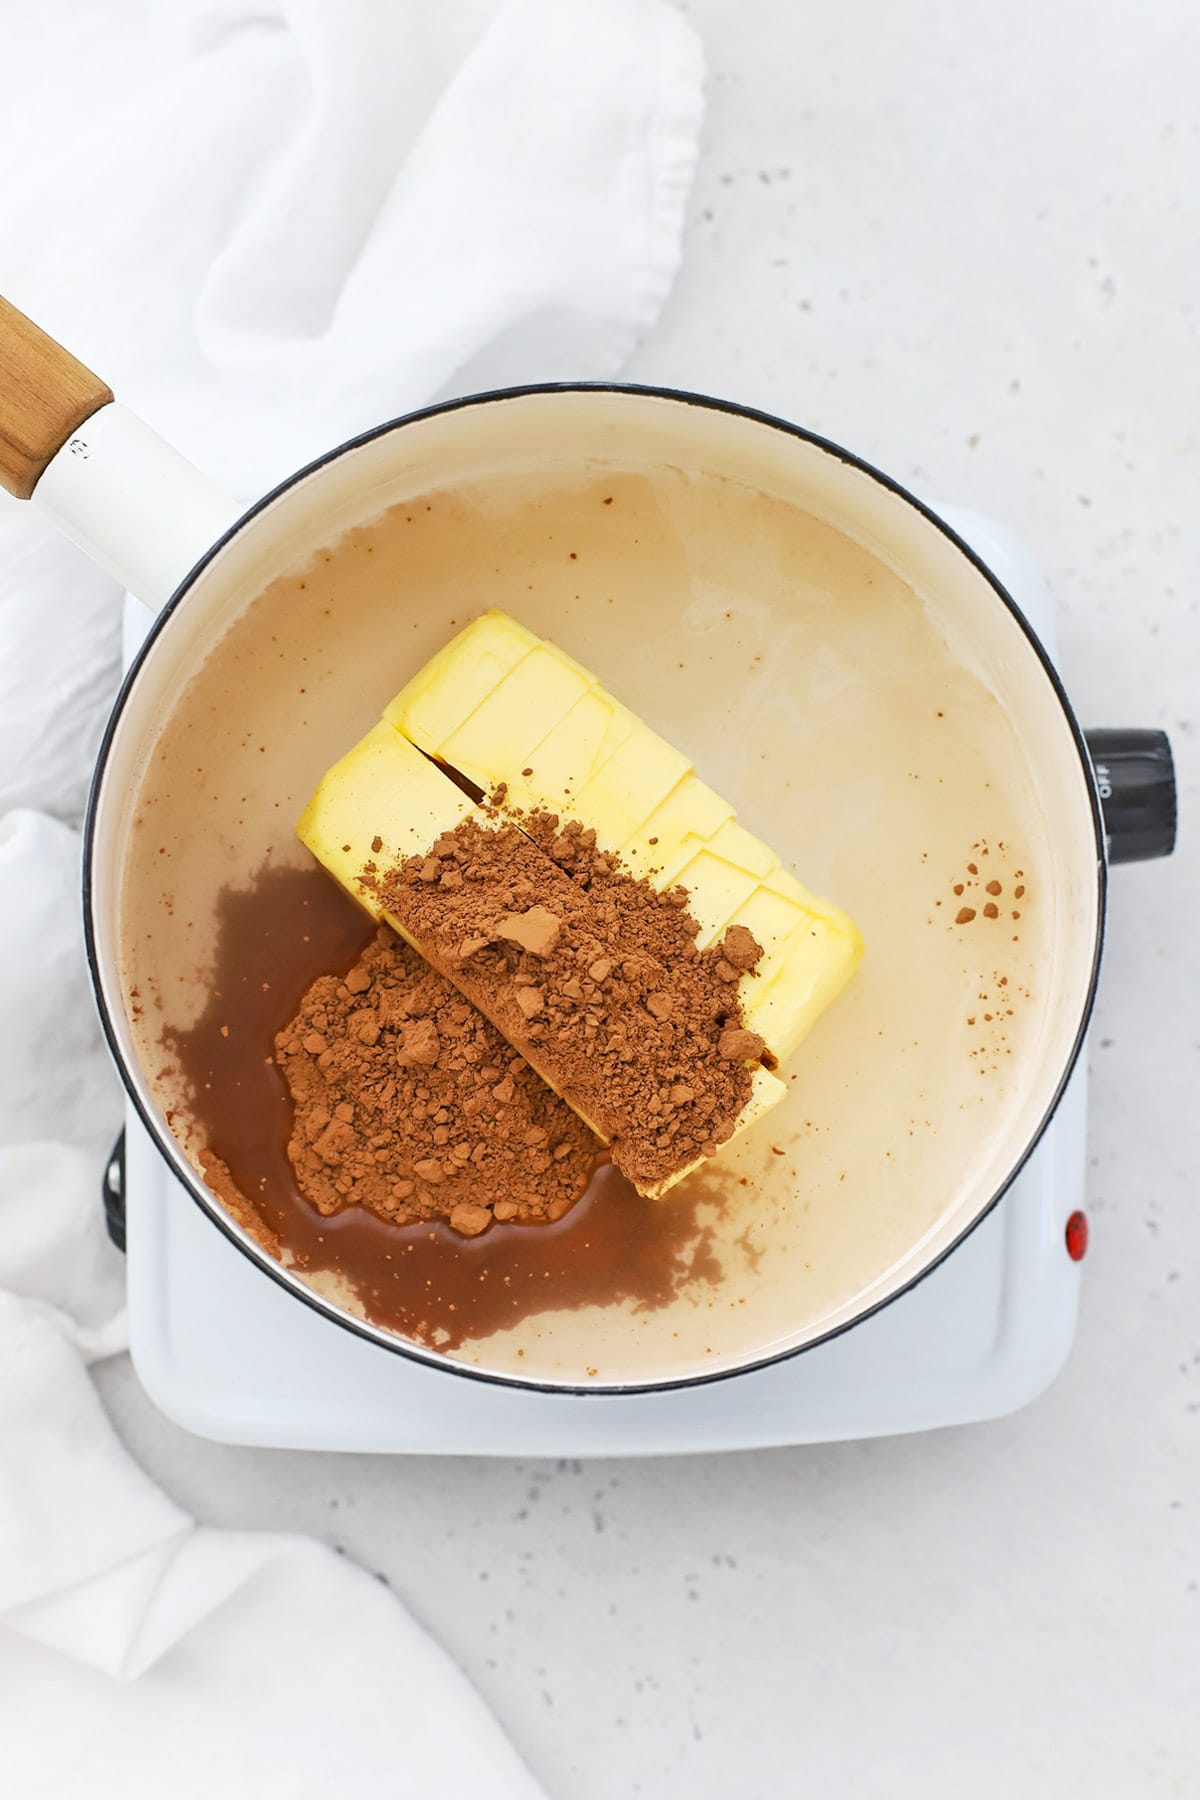 melting cocoa powder, butter, and water to make gluten-free texas sheet cake